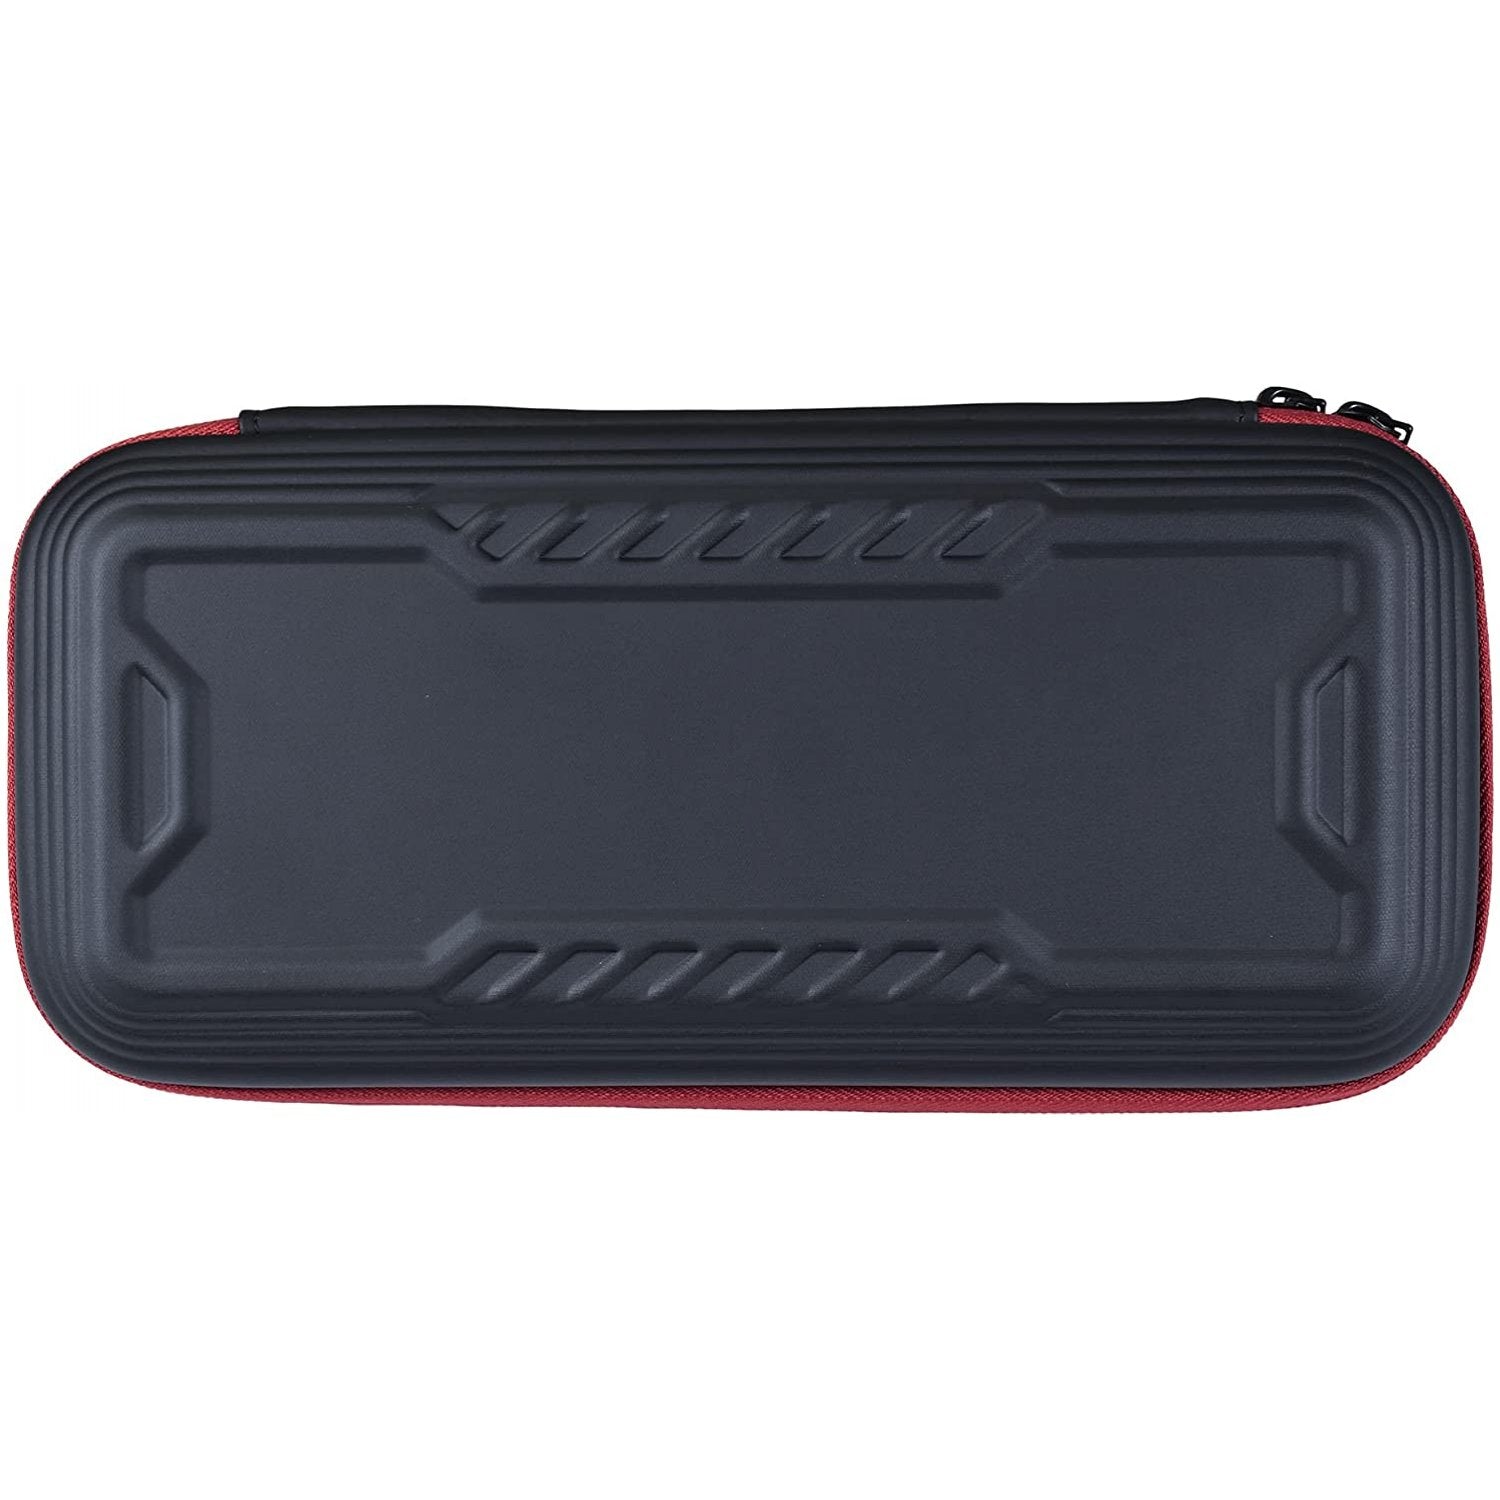 HORI NSW OLED Shock Absorption Tough Pouch Black/Red (NSW-815)